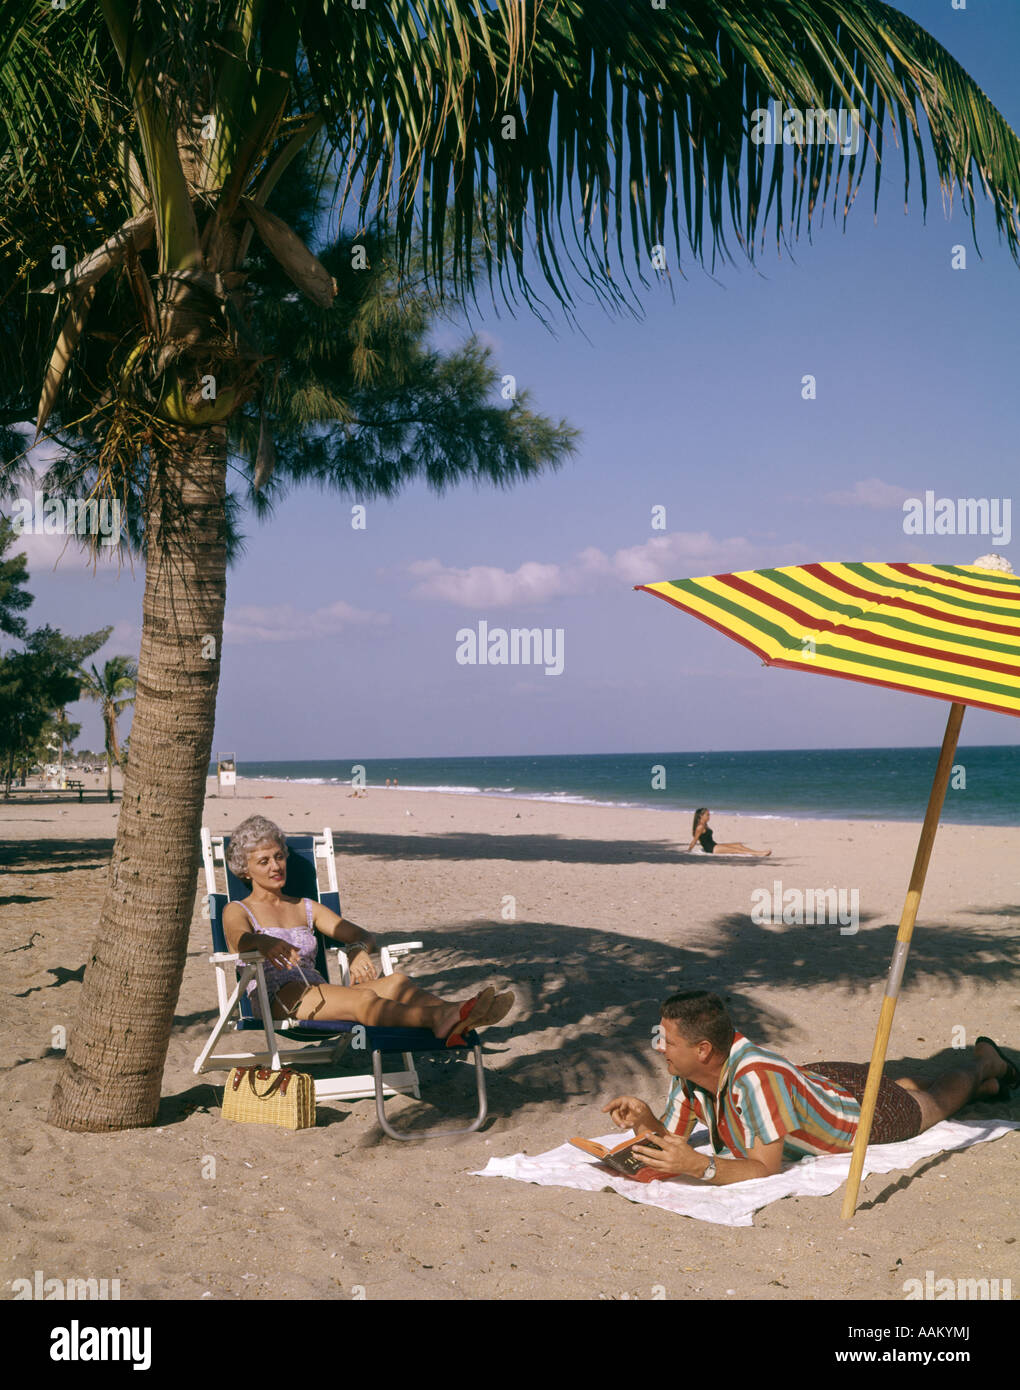 1960s MAN AND WOMAN COUPLE SUNBATHING ON BEACH IN FLORIDA TALKING TOGETHER UNDER PALM TREE AND COLORFUL BEACH UMBRELLA Stock Photo